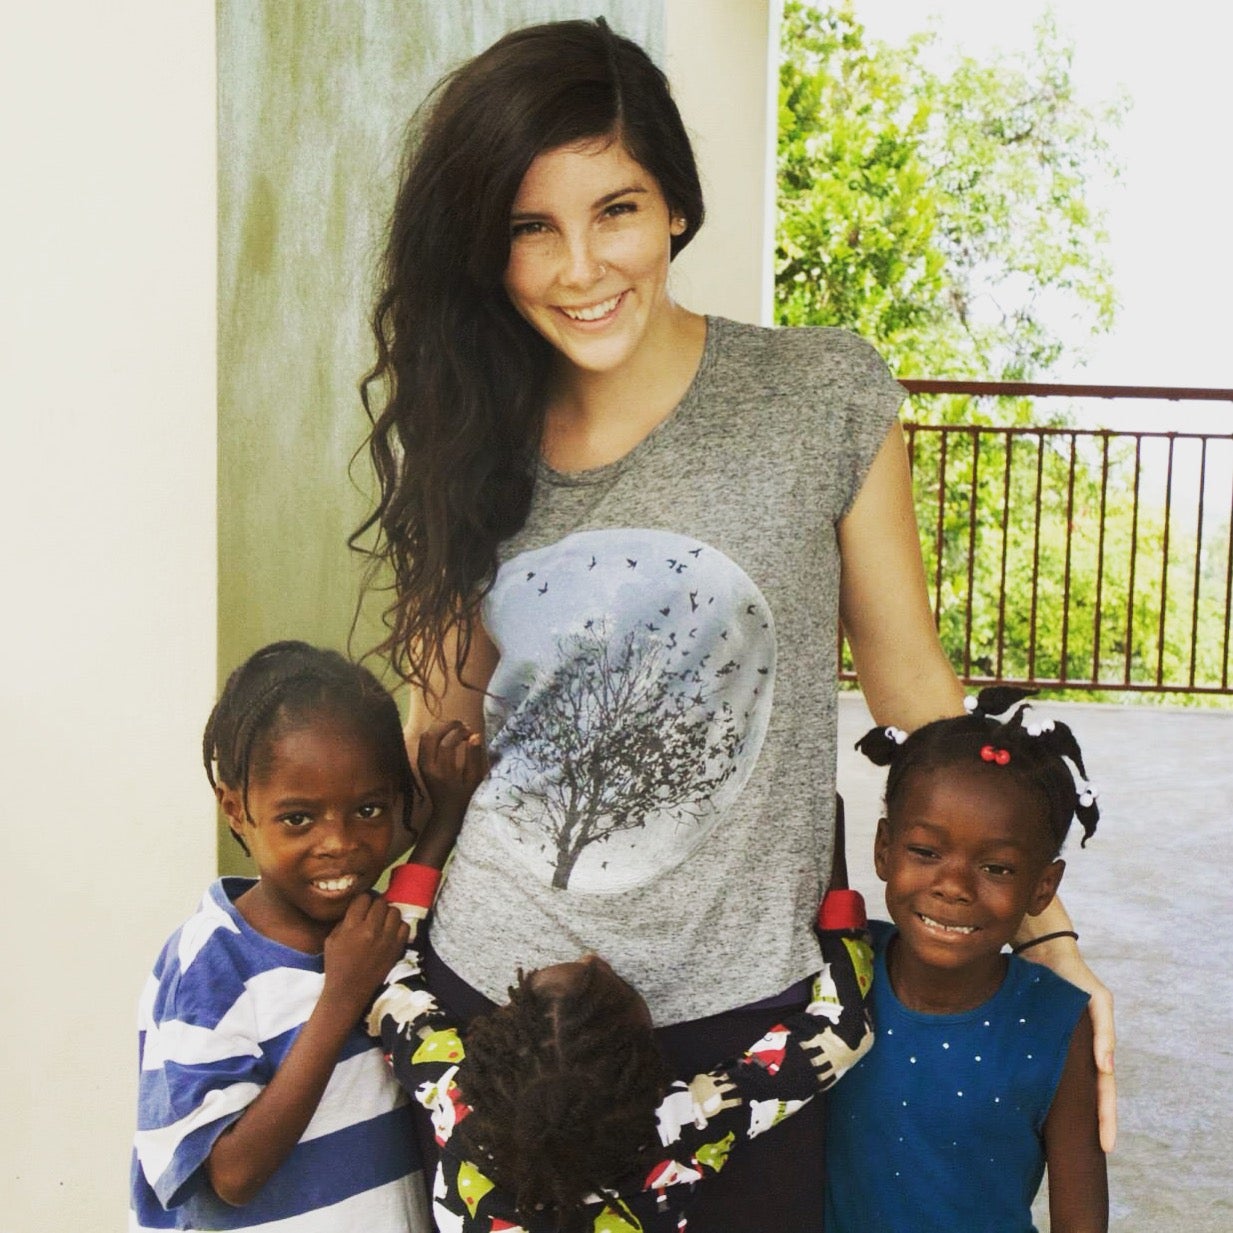 Maria with her students in Haiti